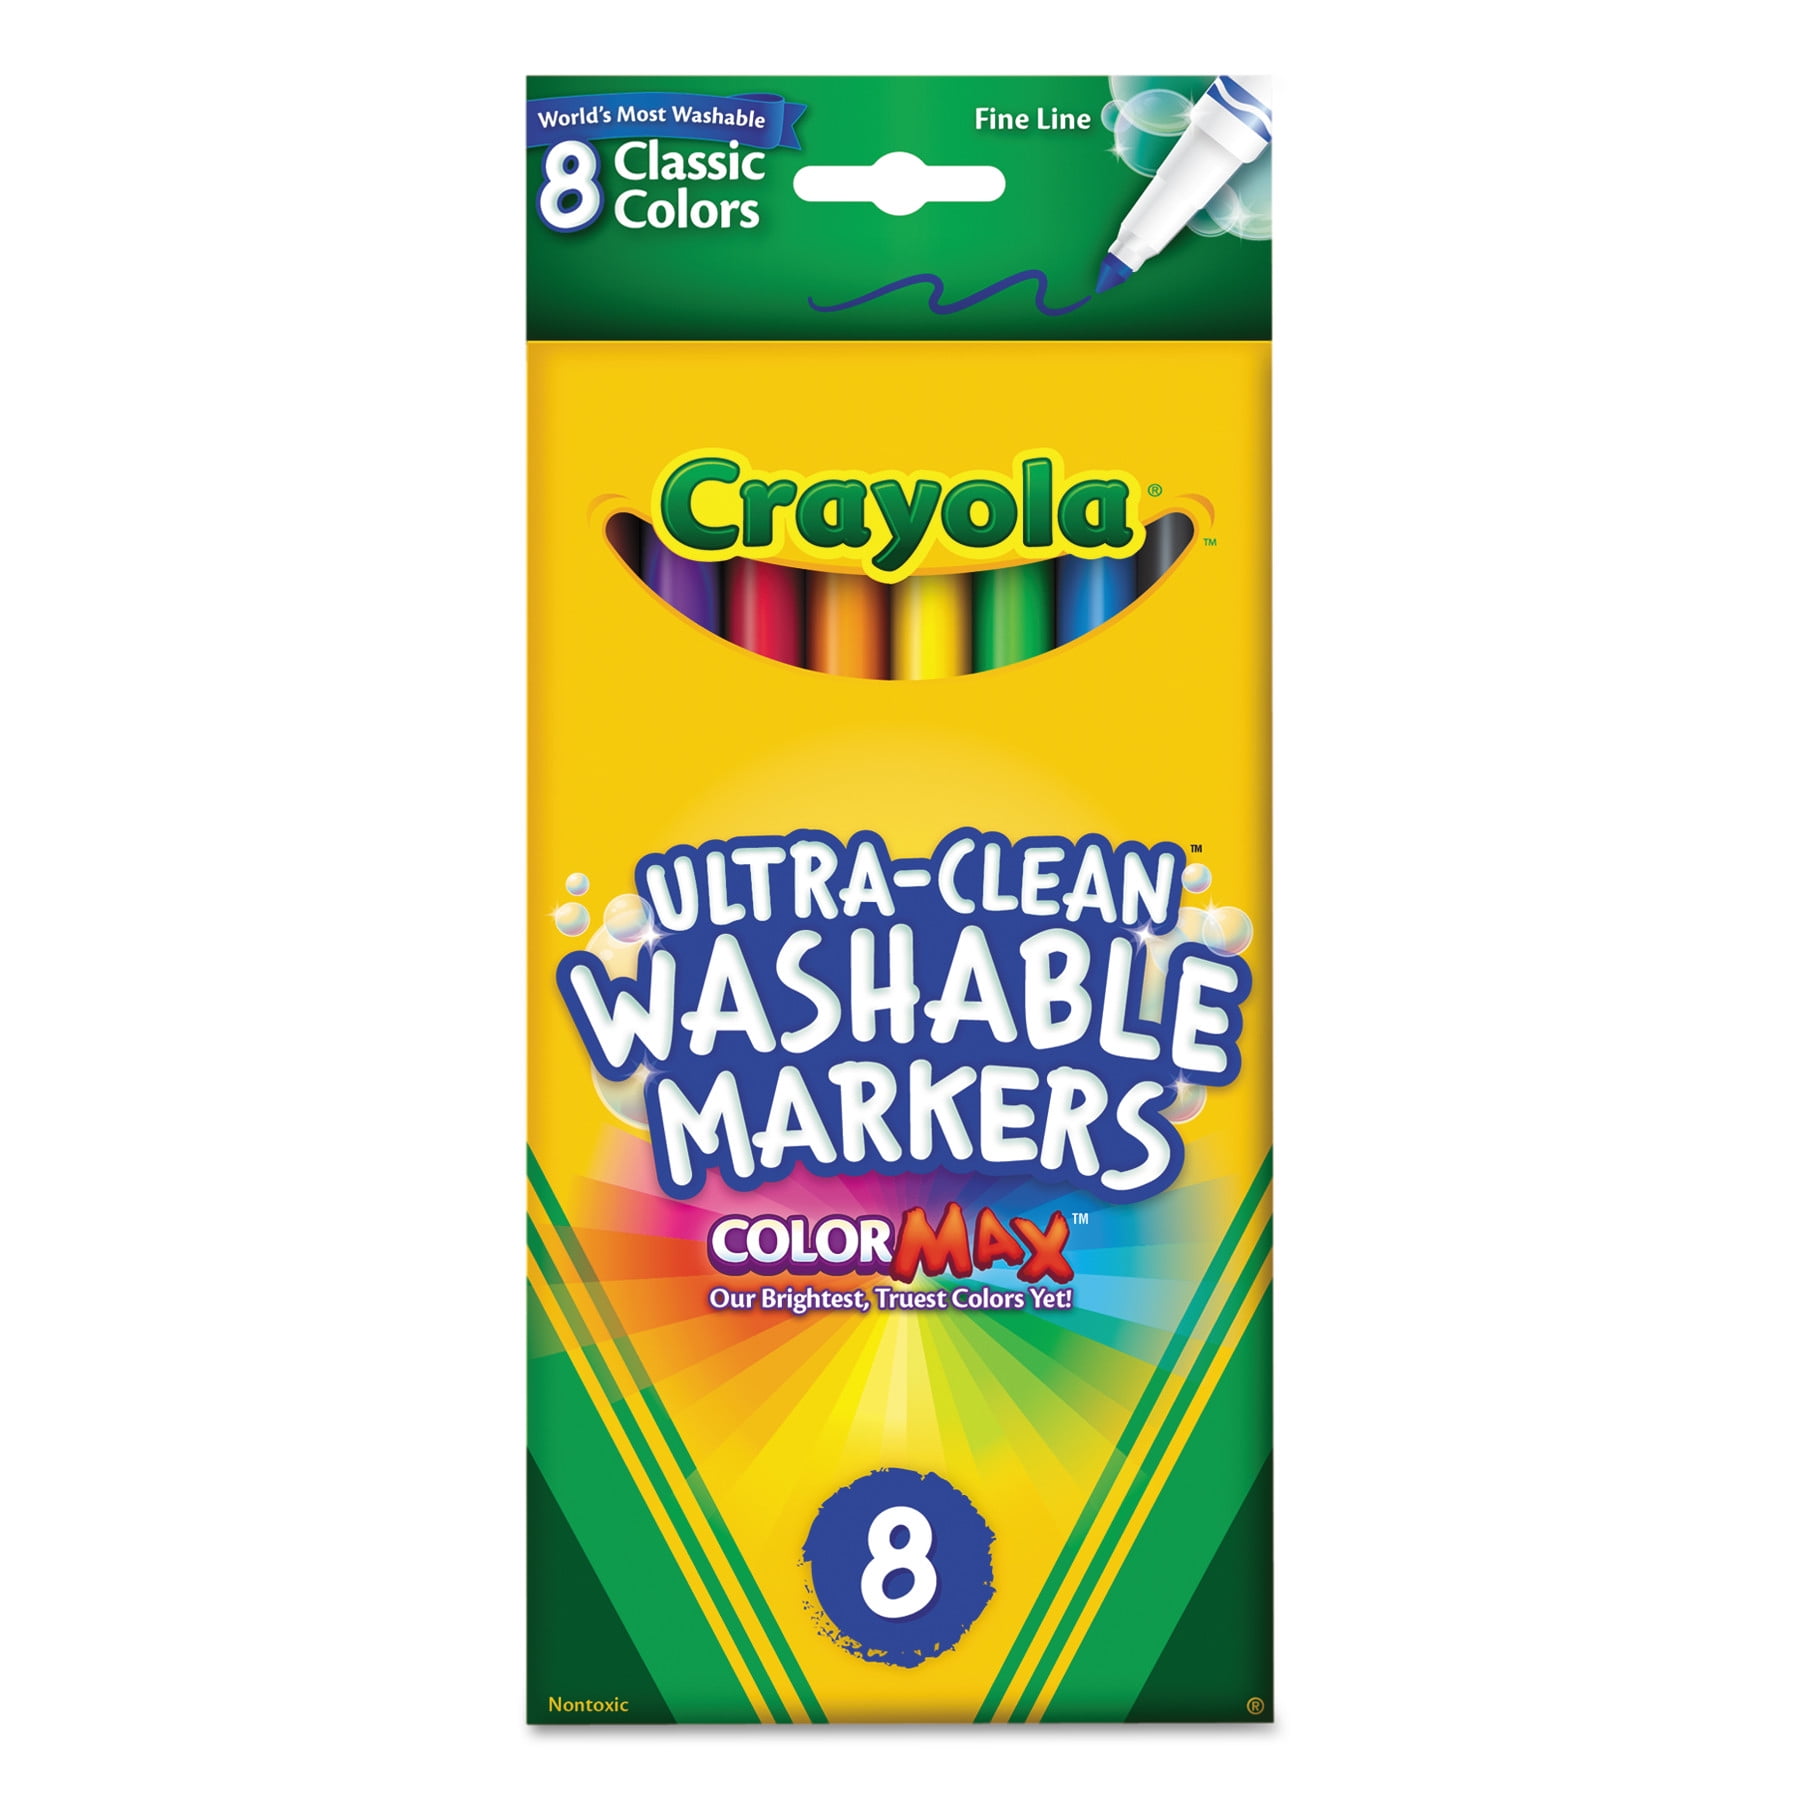 Tradineur 12 Color Thick Markers For Kids Hard Pointed Markers For